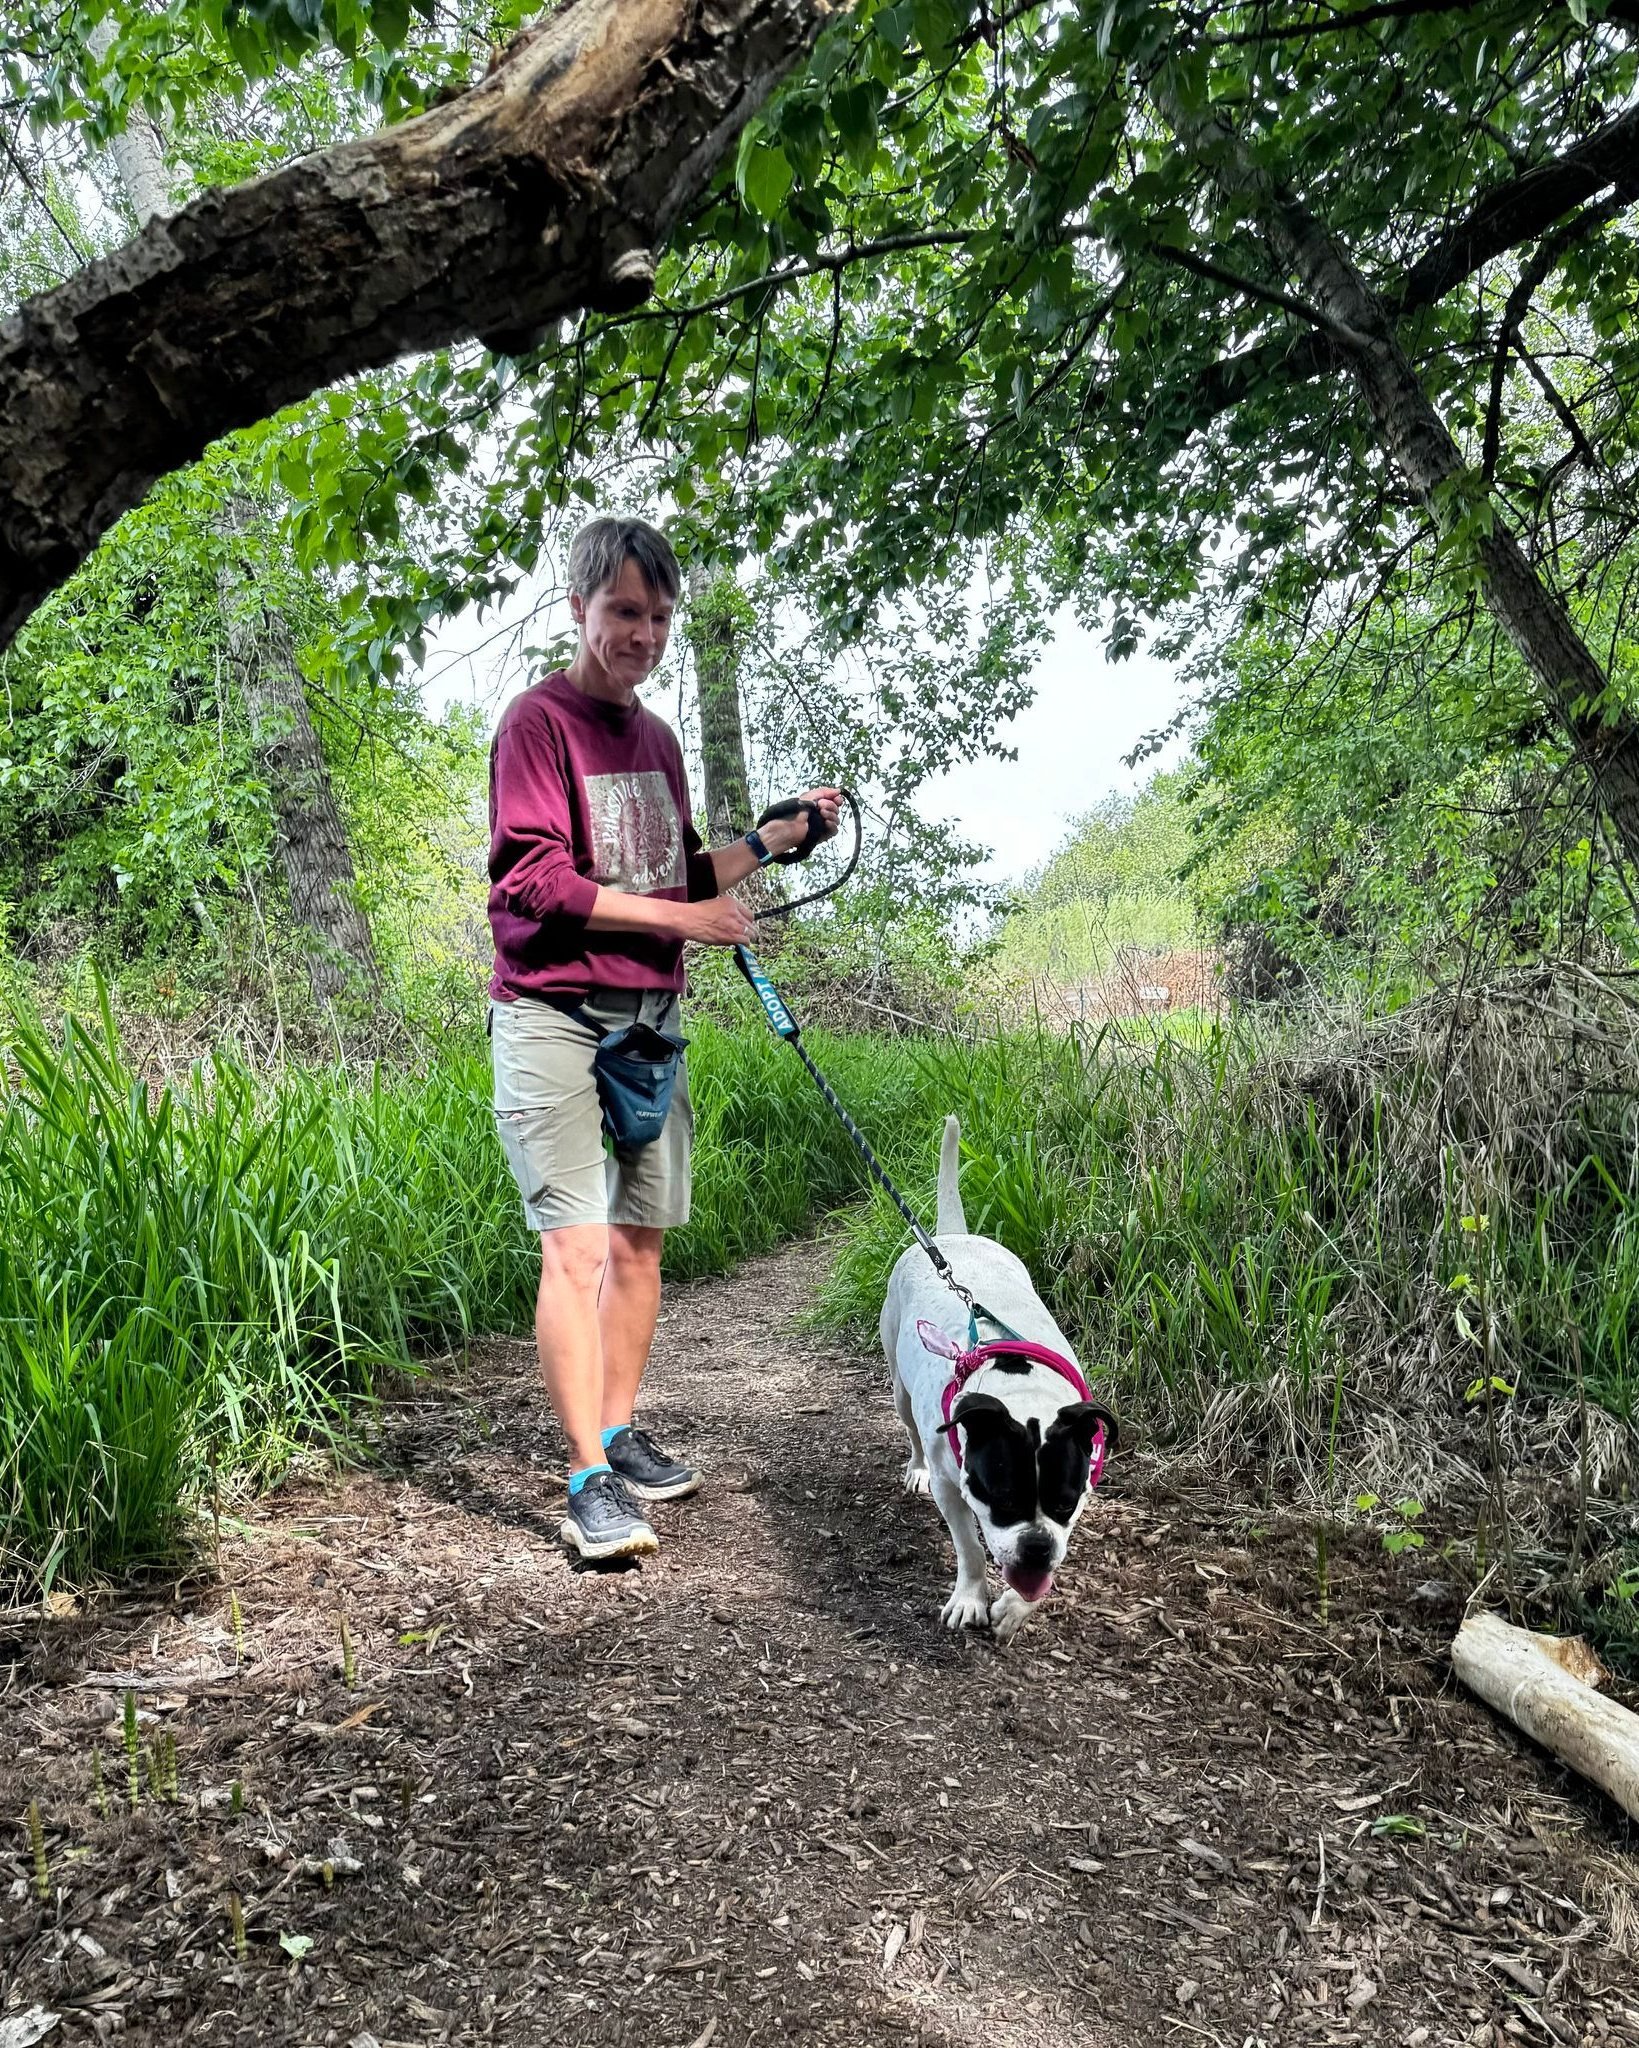 Today, we're highlighting our Pawsitive Adventures program, an initiative focused on bringing joy and enrichment to the lives of our shelter dogs at Blue Mountain Humane Society.

Bella and Rex enjoyed a day out at Arthur Rempel Nature Trail and Park